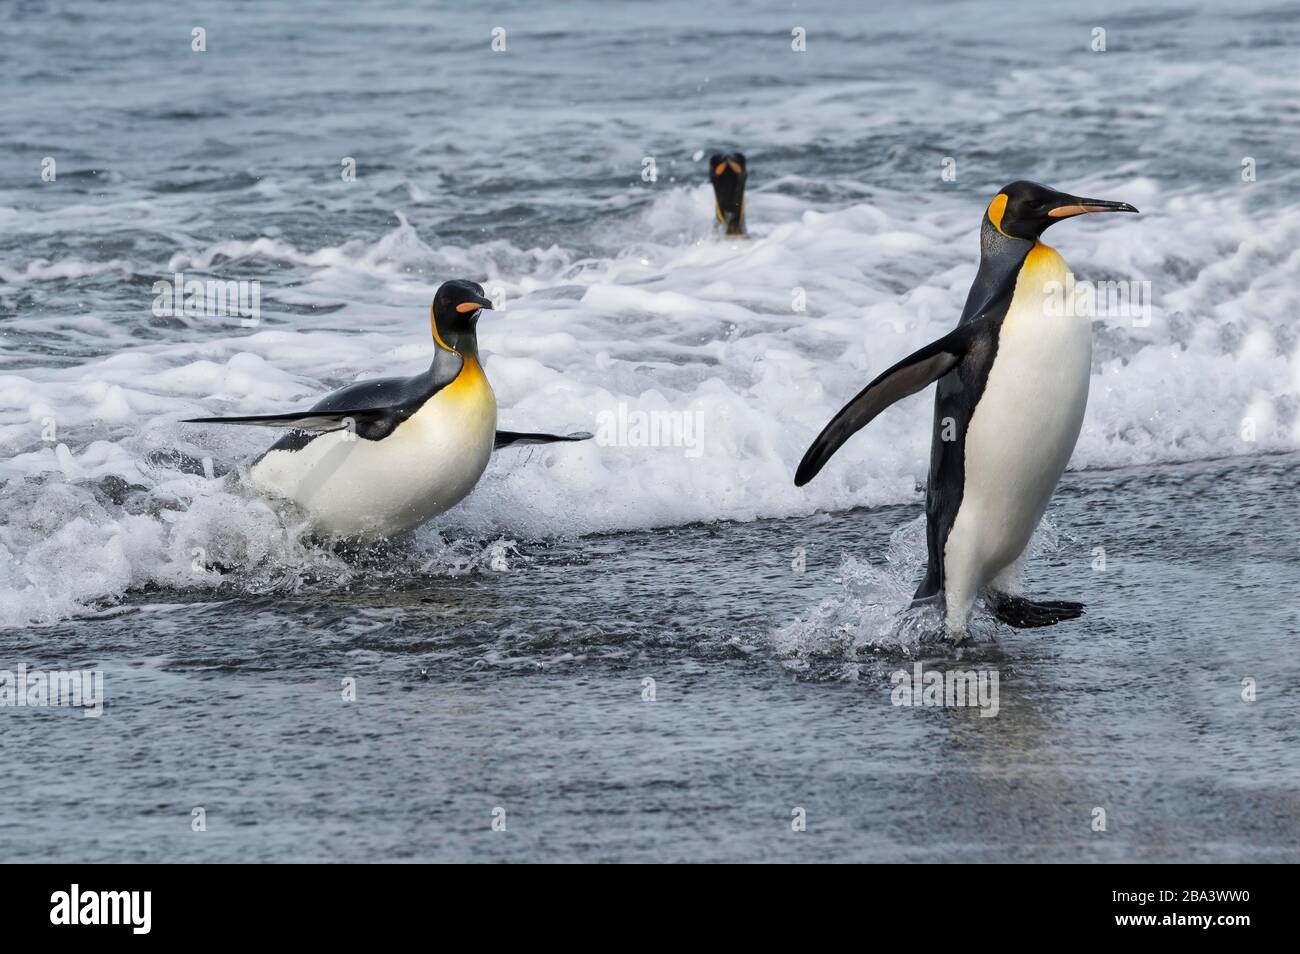 Group of King Penguins (Aptenodytes patagonicus) coming out of the water, Salisbury Plain, South Georgia Island, Antarctic Stock Photo